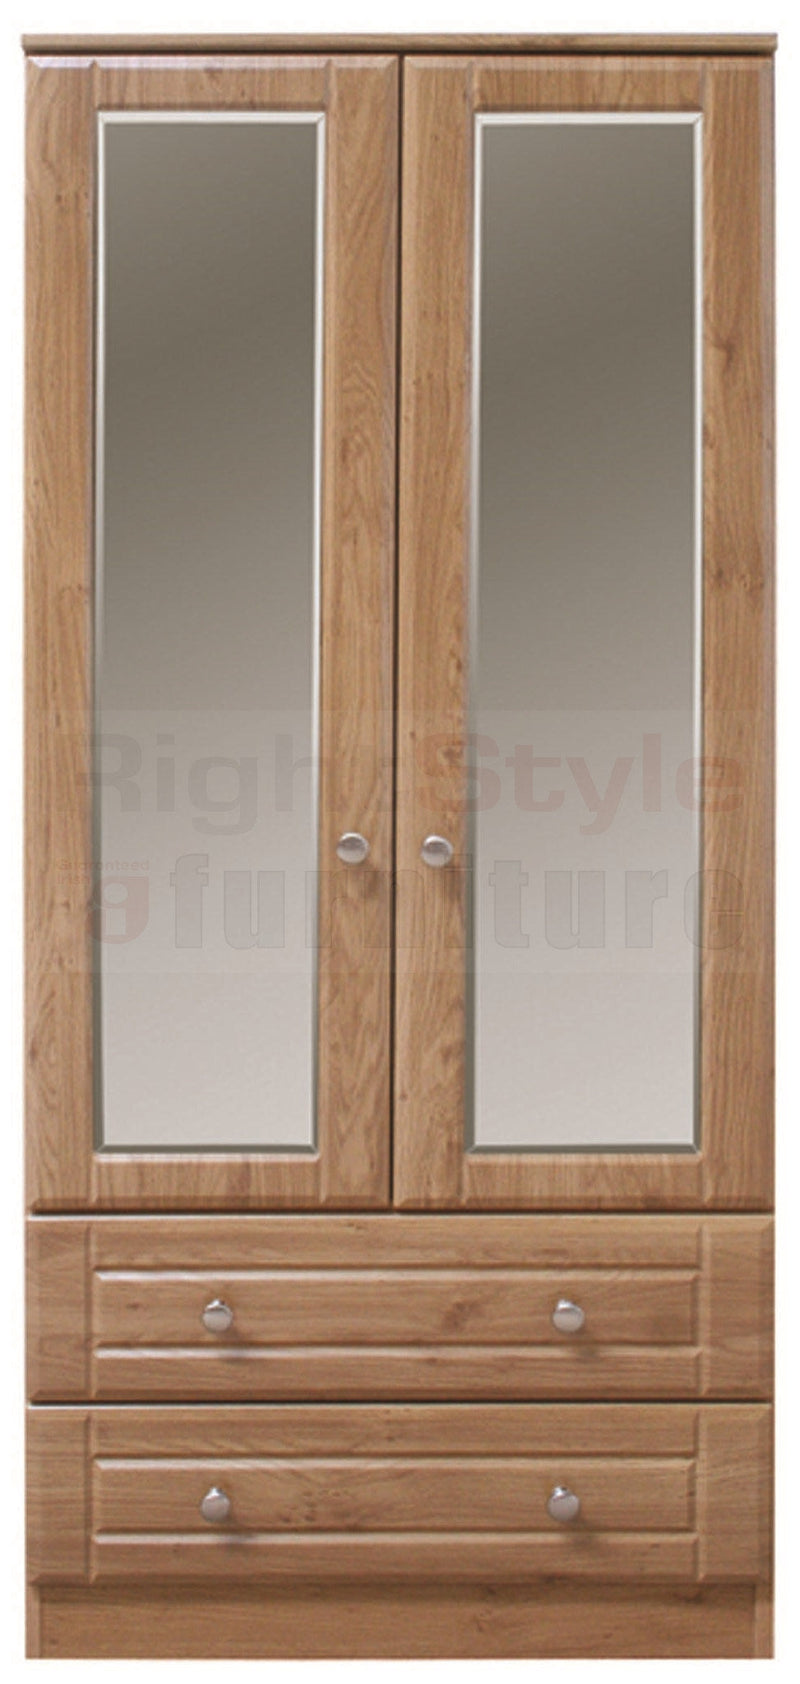 Nore 2 Door/2 Drawer Robe with Mirrors